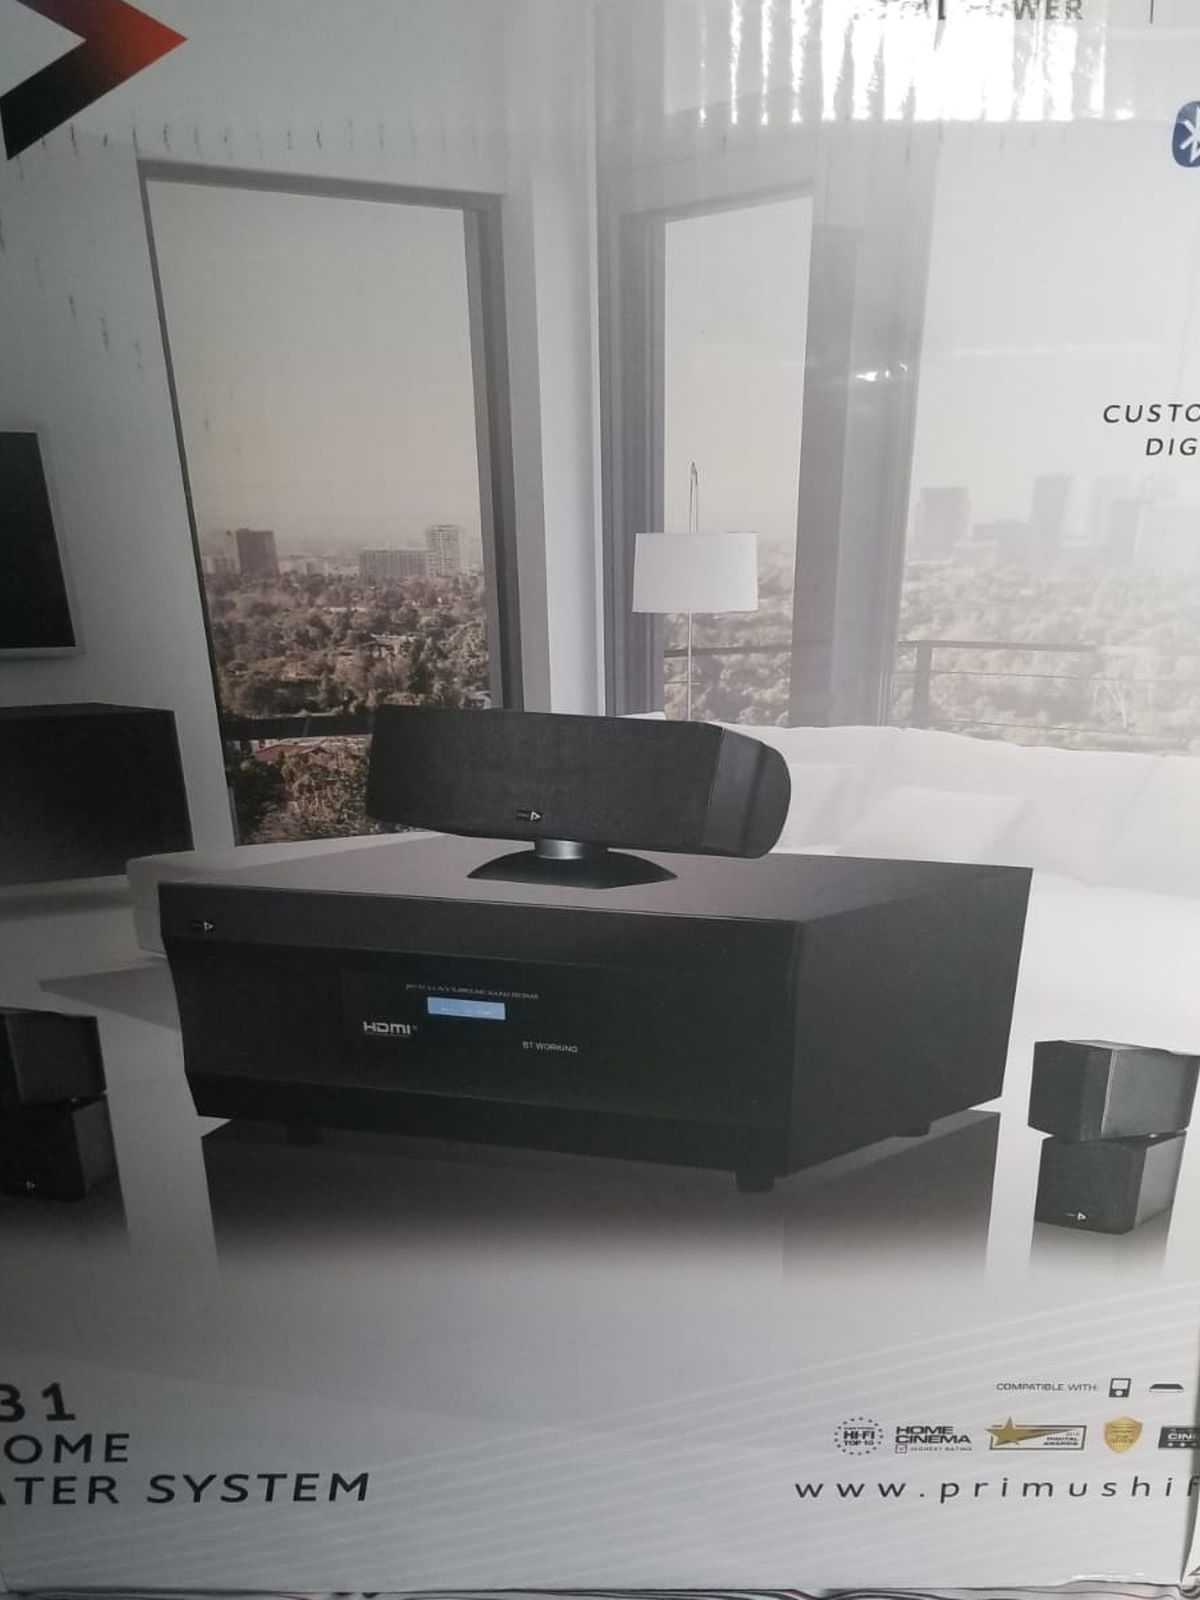 Primus PM31.5 Home Theater System